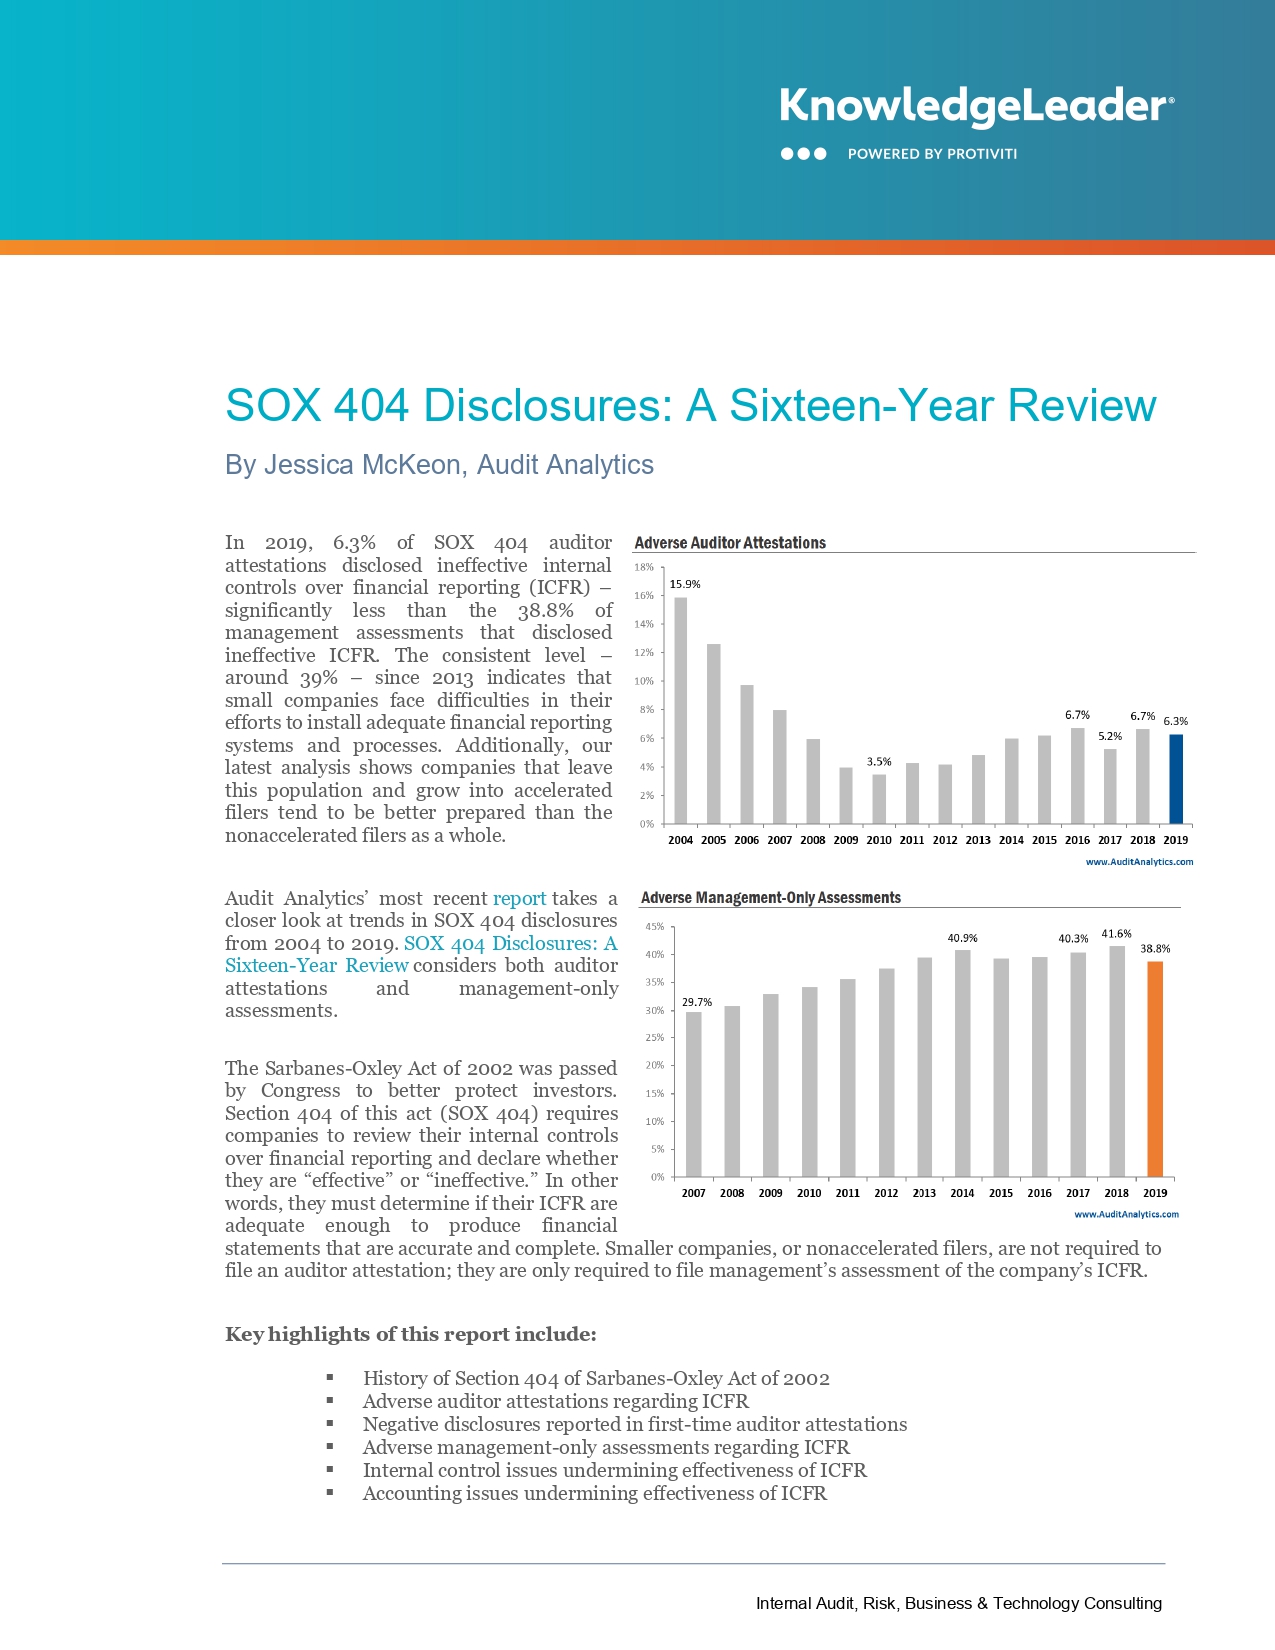 SOX 404 Disclosures A Sixteen-Year Review